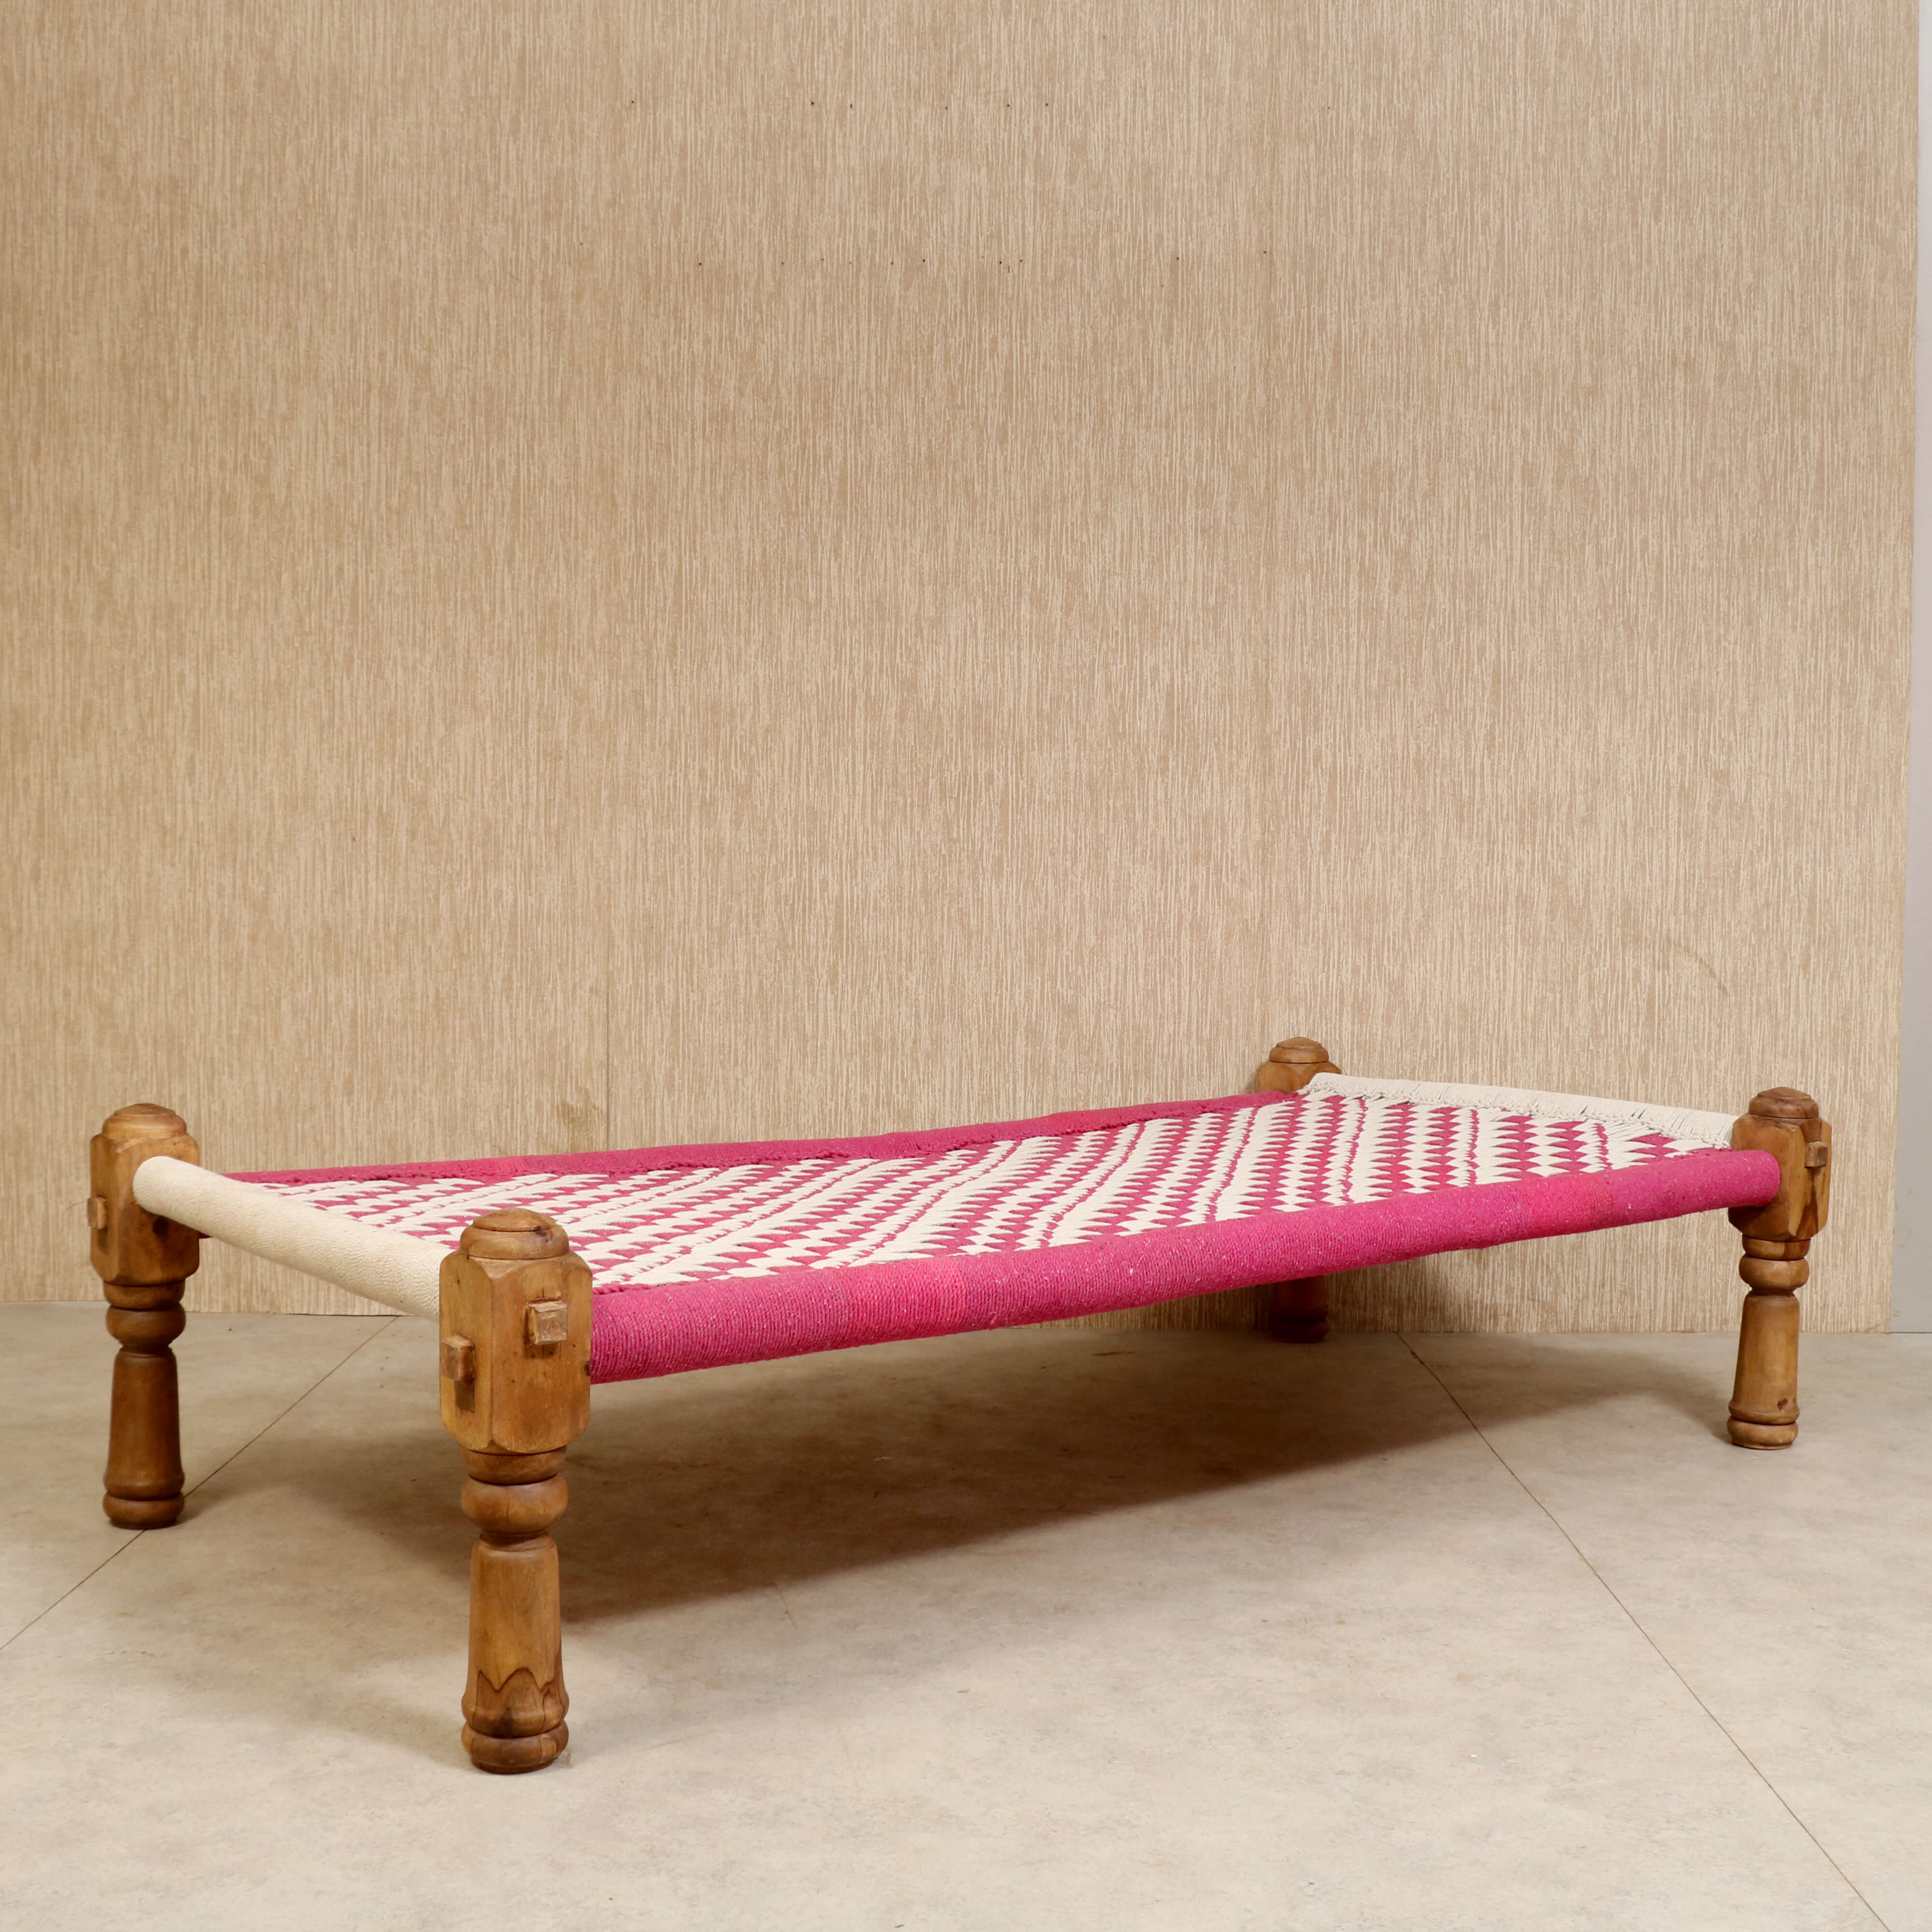 Traditional Wooden Day Bed Bed